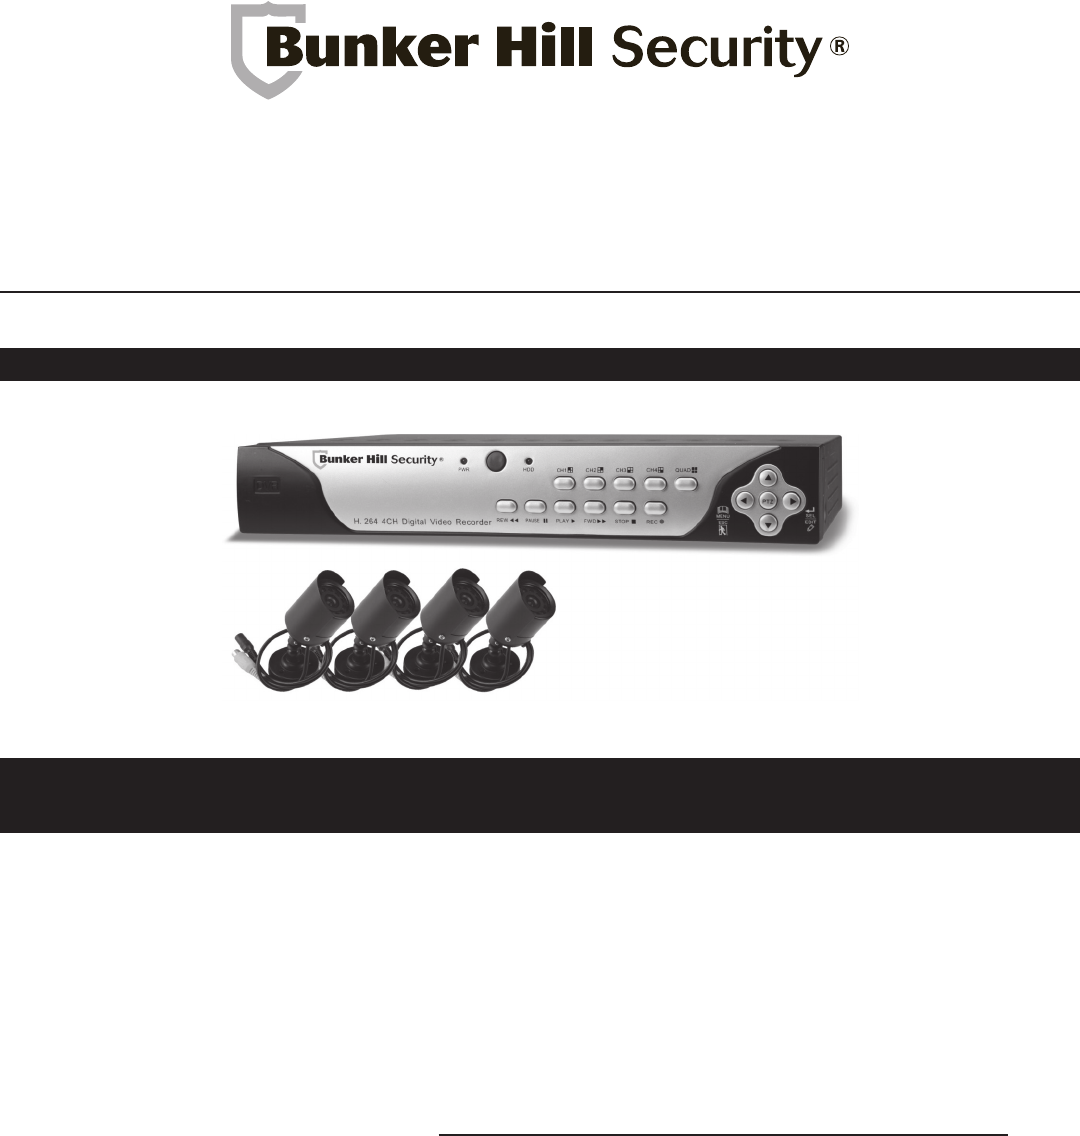 remote view of bunker hill security dvr settings through router